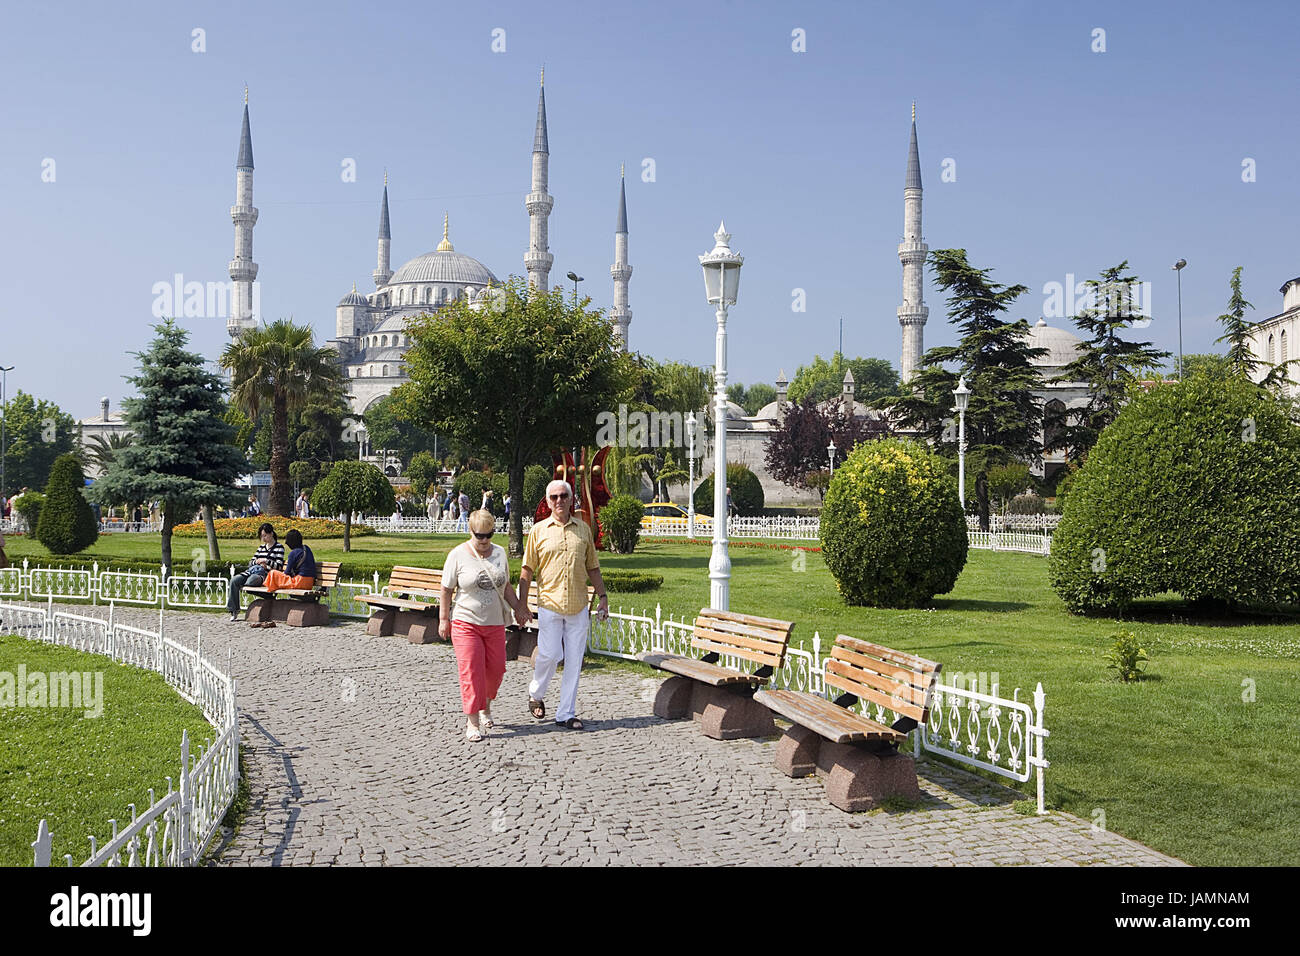 Turkey,Istanbul,sultan Ahmet Camii,'blue mosque',park,tourist,no model release,town,city,metropolis,port,culture,faith,religion,Islam,structure,historically,architecture,church,sacred construction,Sultan-Ahmet-Camii,sultan's Ahmed's mosque,mosque,domed building,towers,landmarks,place of interest,minarets,domes,park,footpath,park-benches,people, Stock Photo